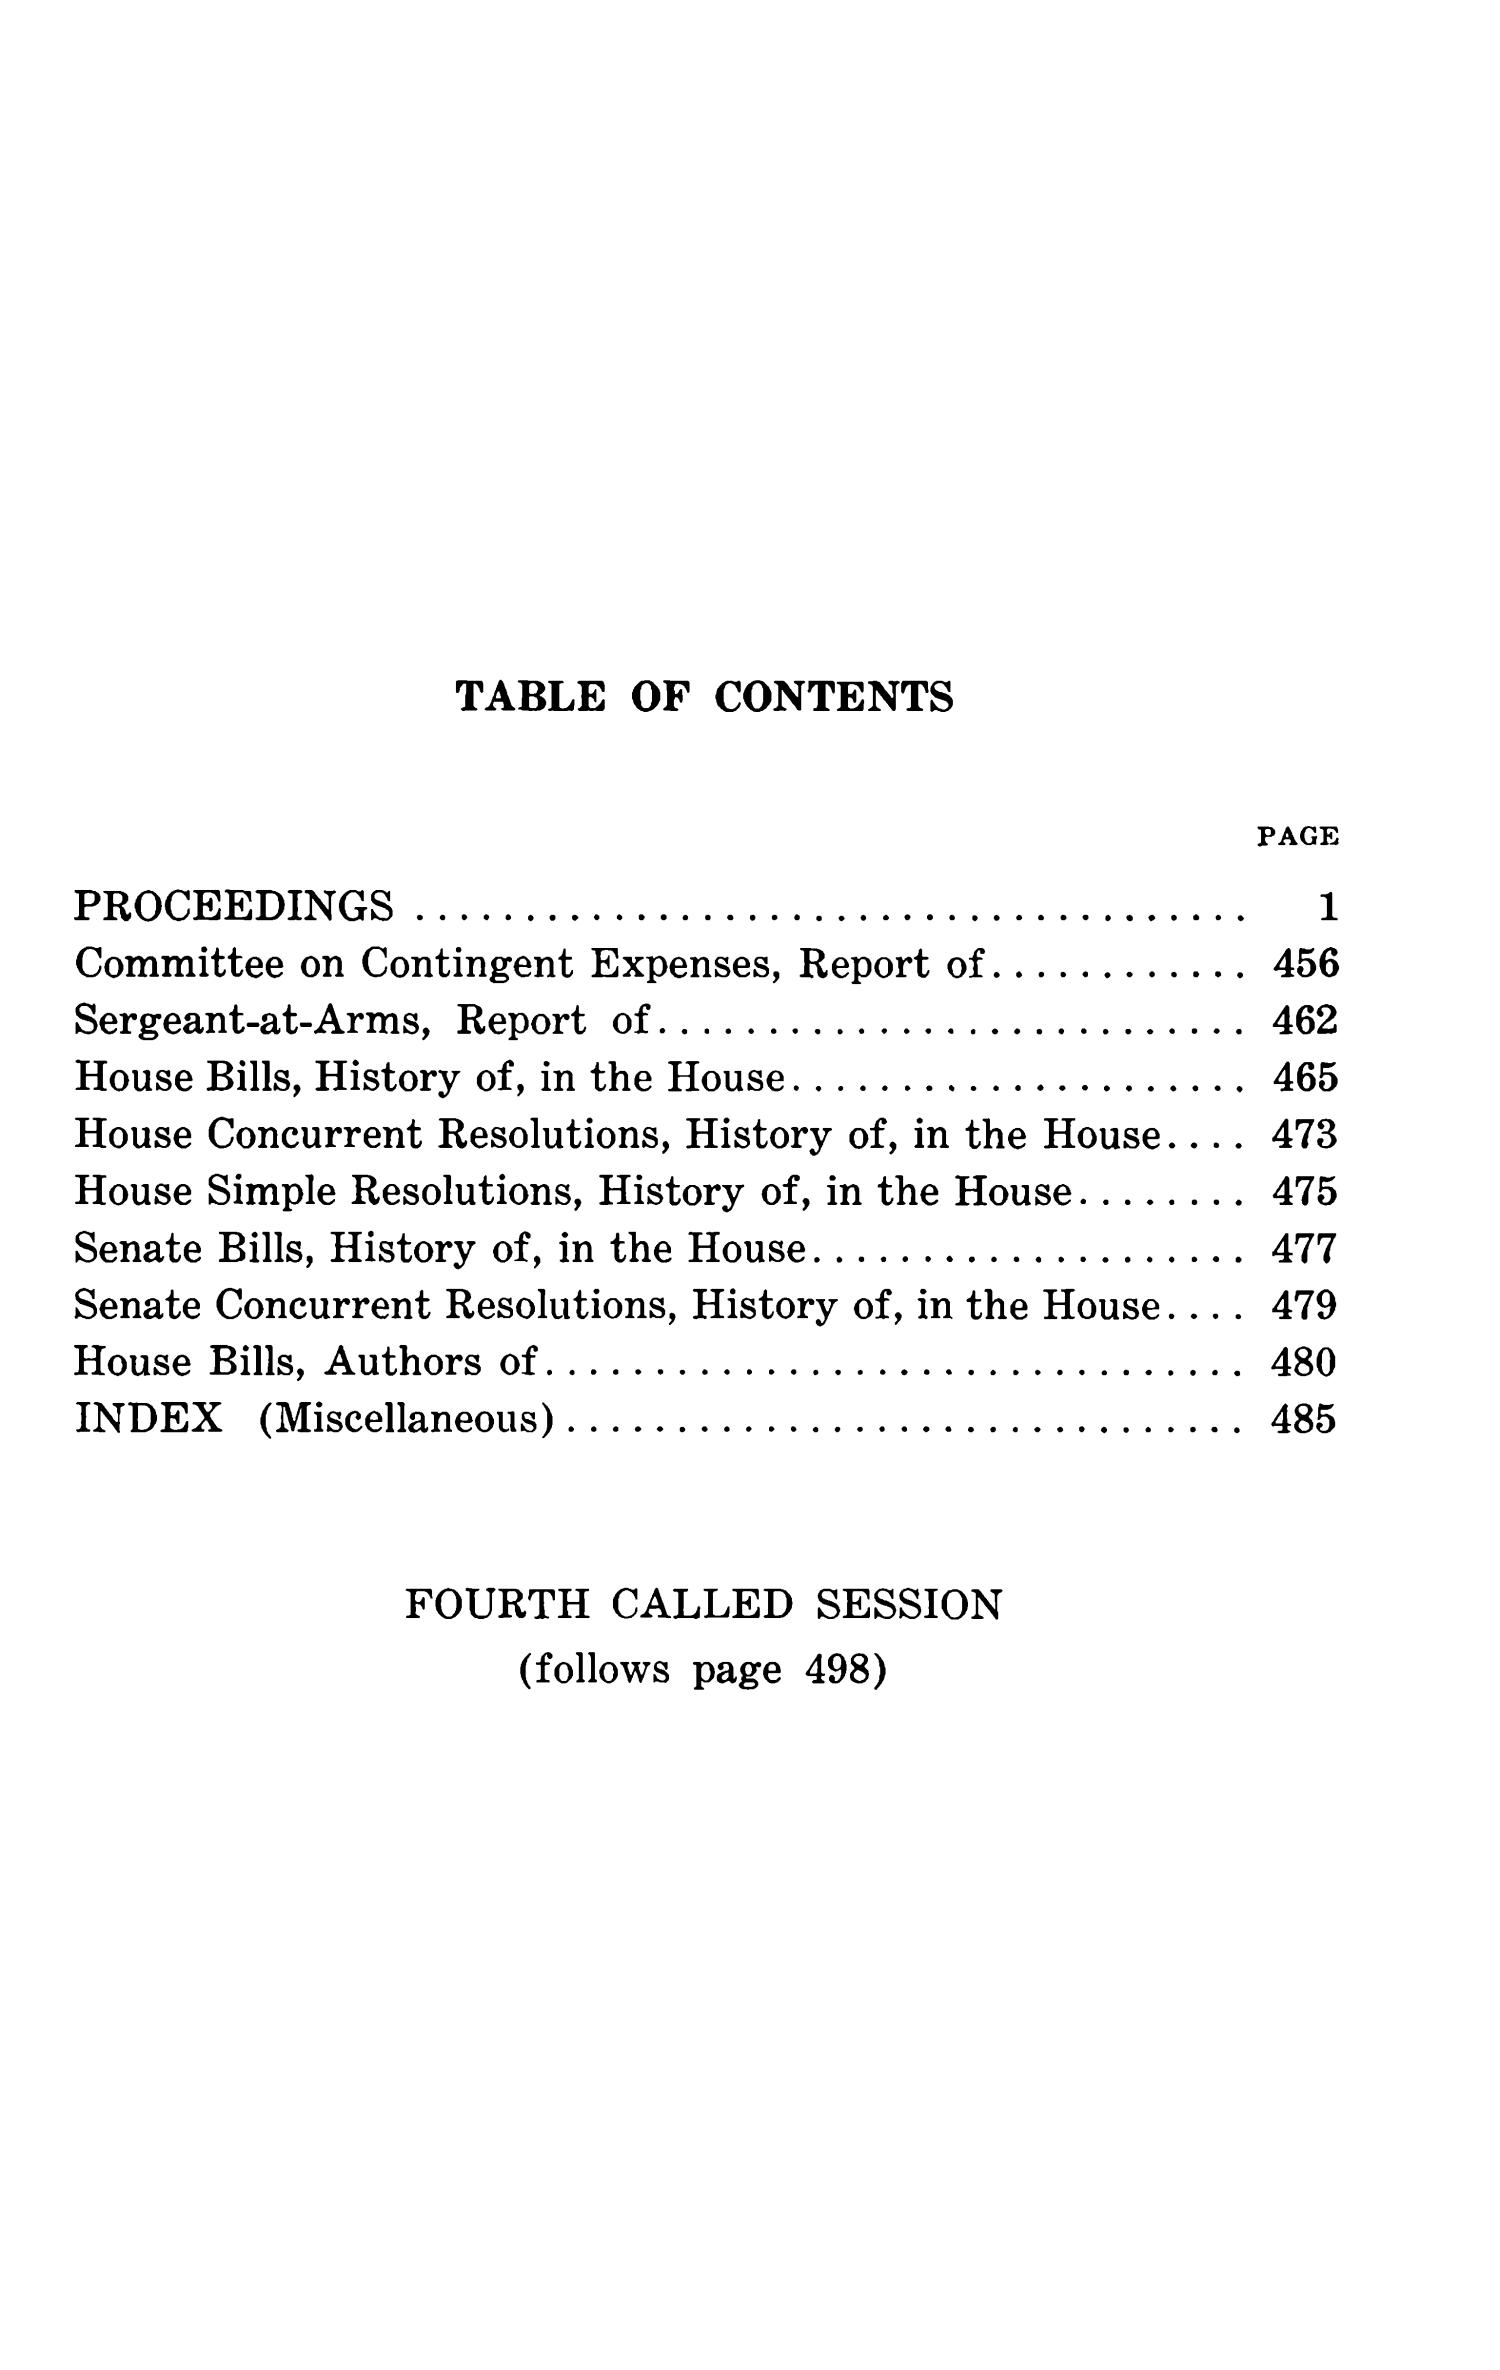 Journal of the House of Representatives of the Third and Fourth Called Sessions of the Forty-Third Legislature of the State of Texas
                                                
                                                    None
                                                